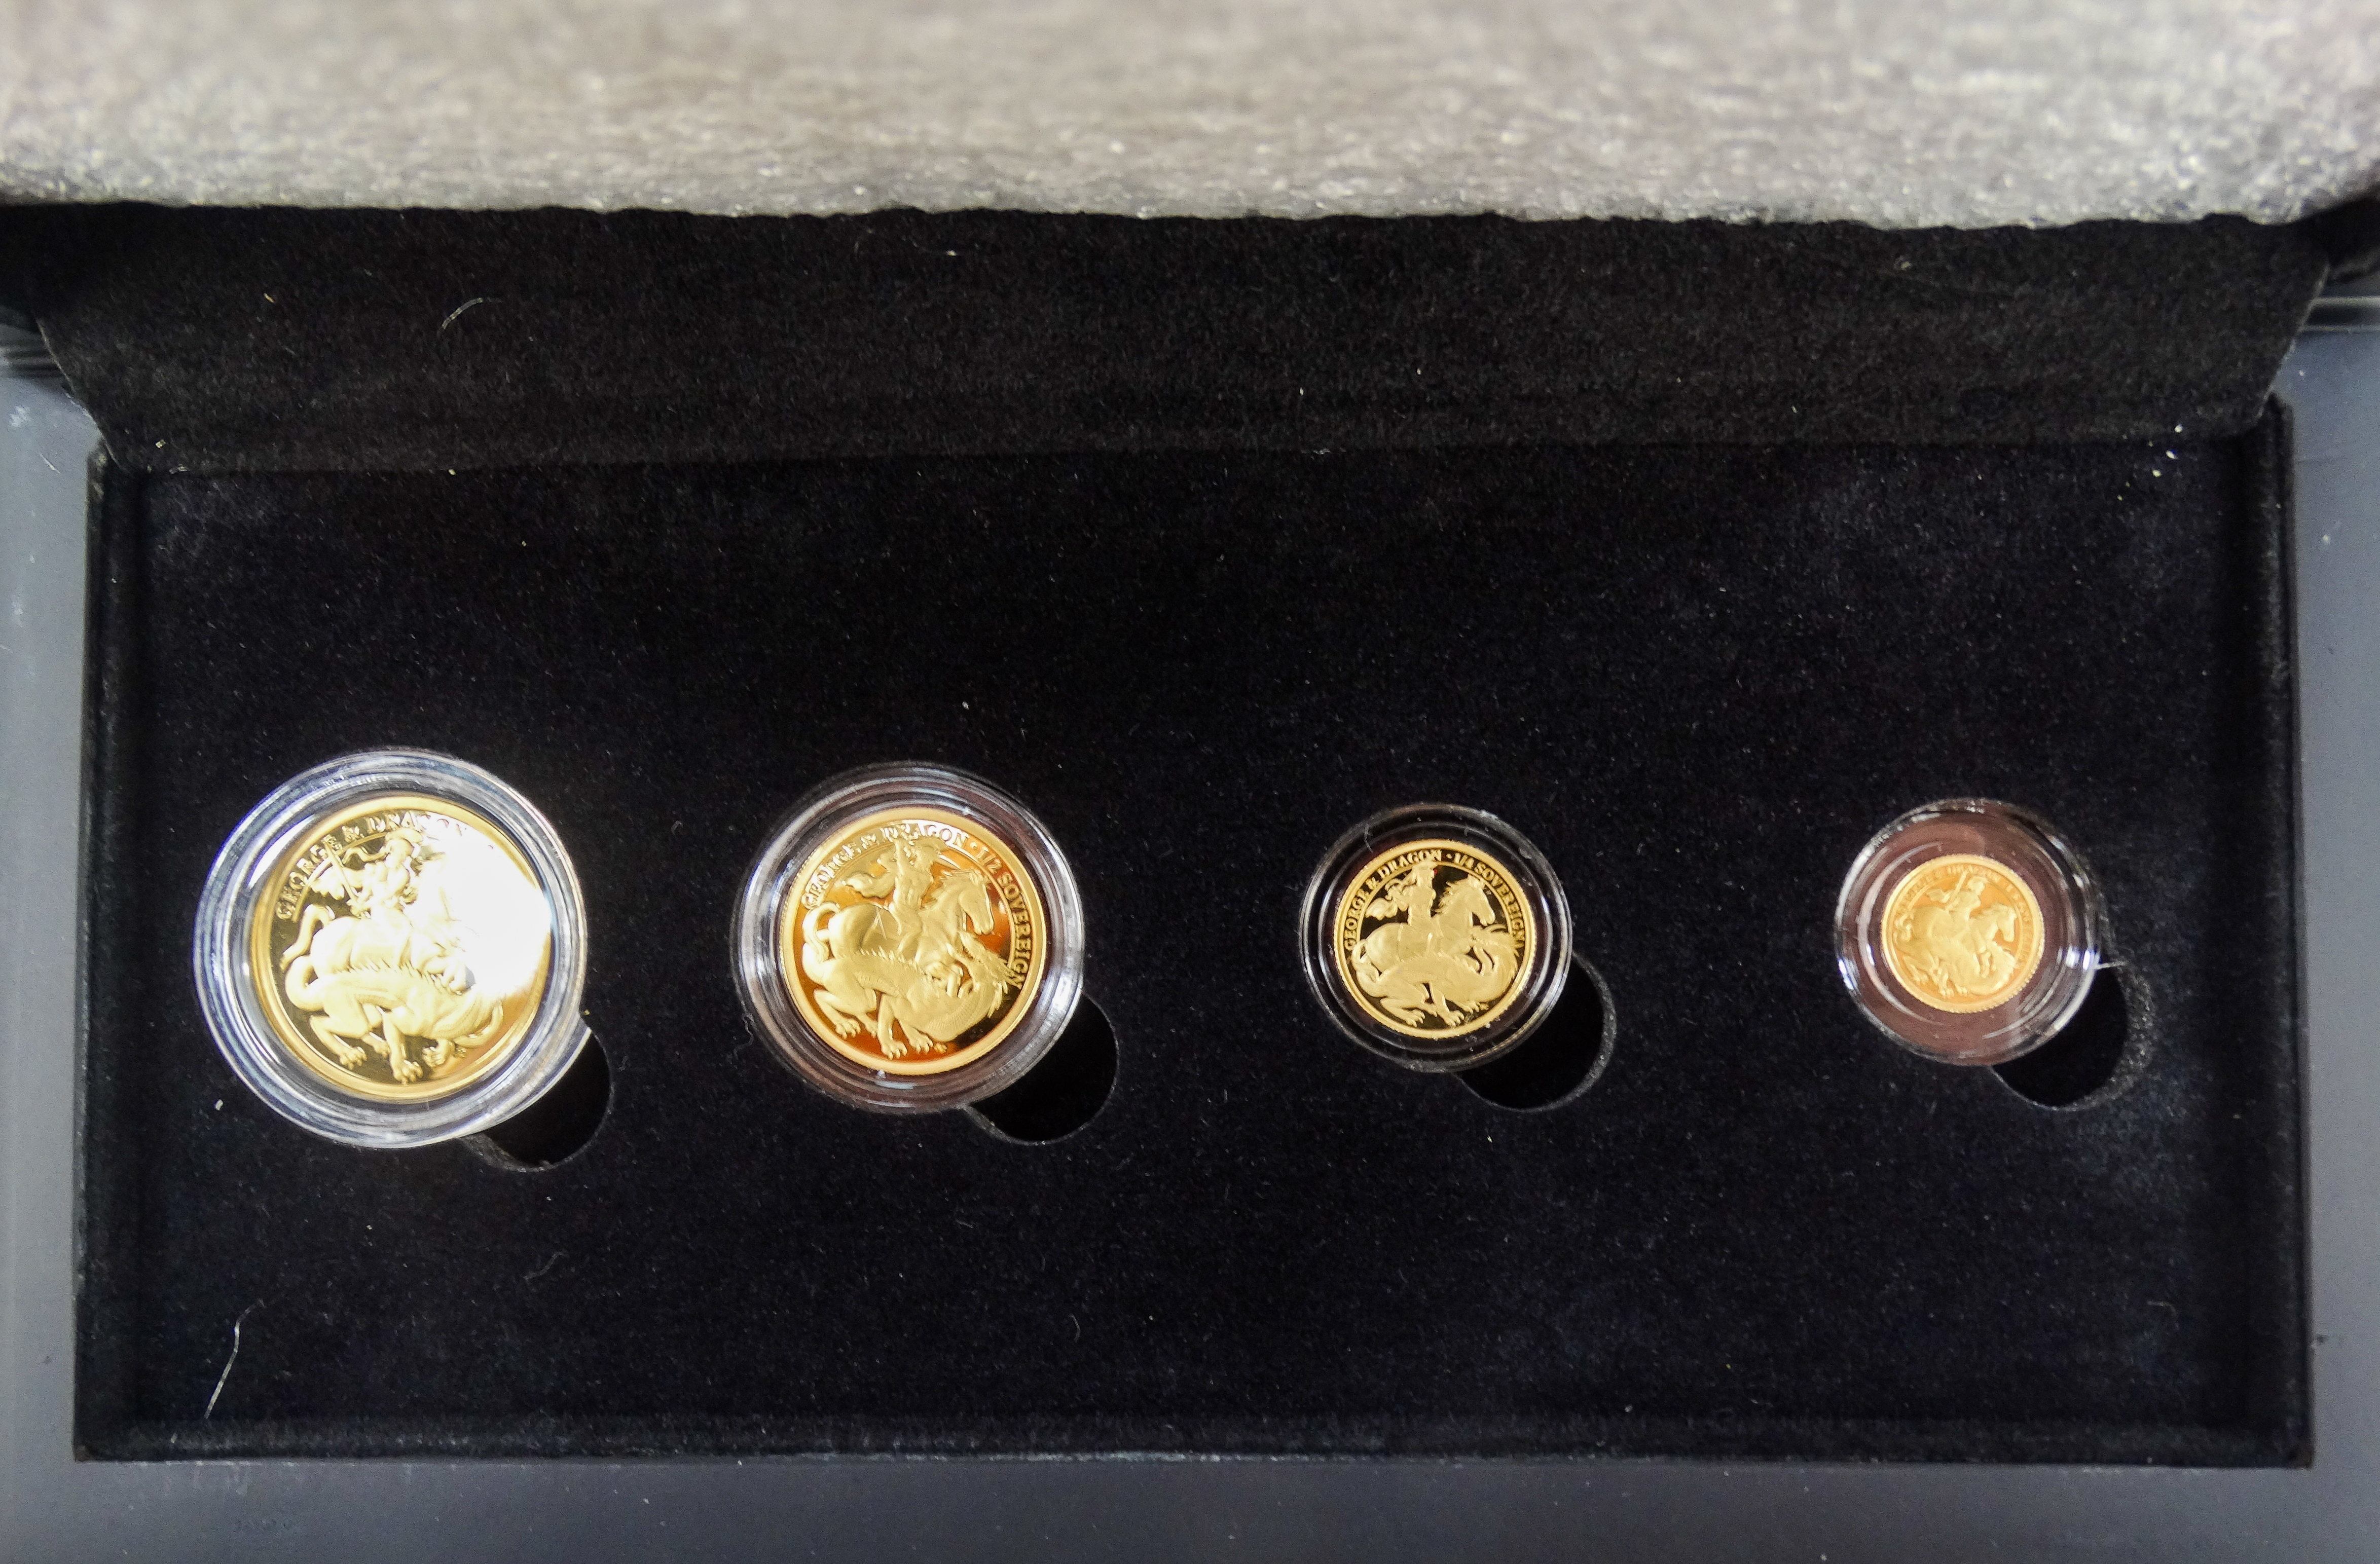 Hattons of London commemorative set of gold coins - 2021 200th anniversary, comprising sovereign, - Image 2 of 4